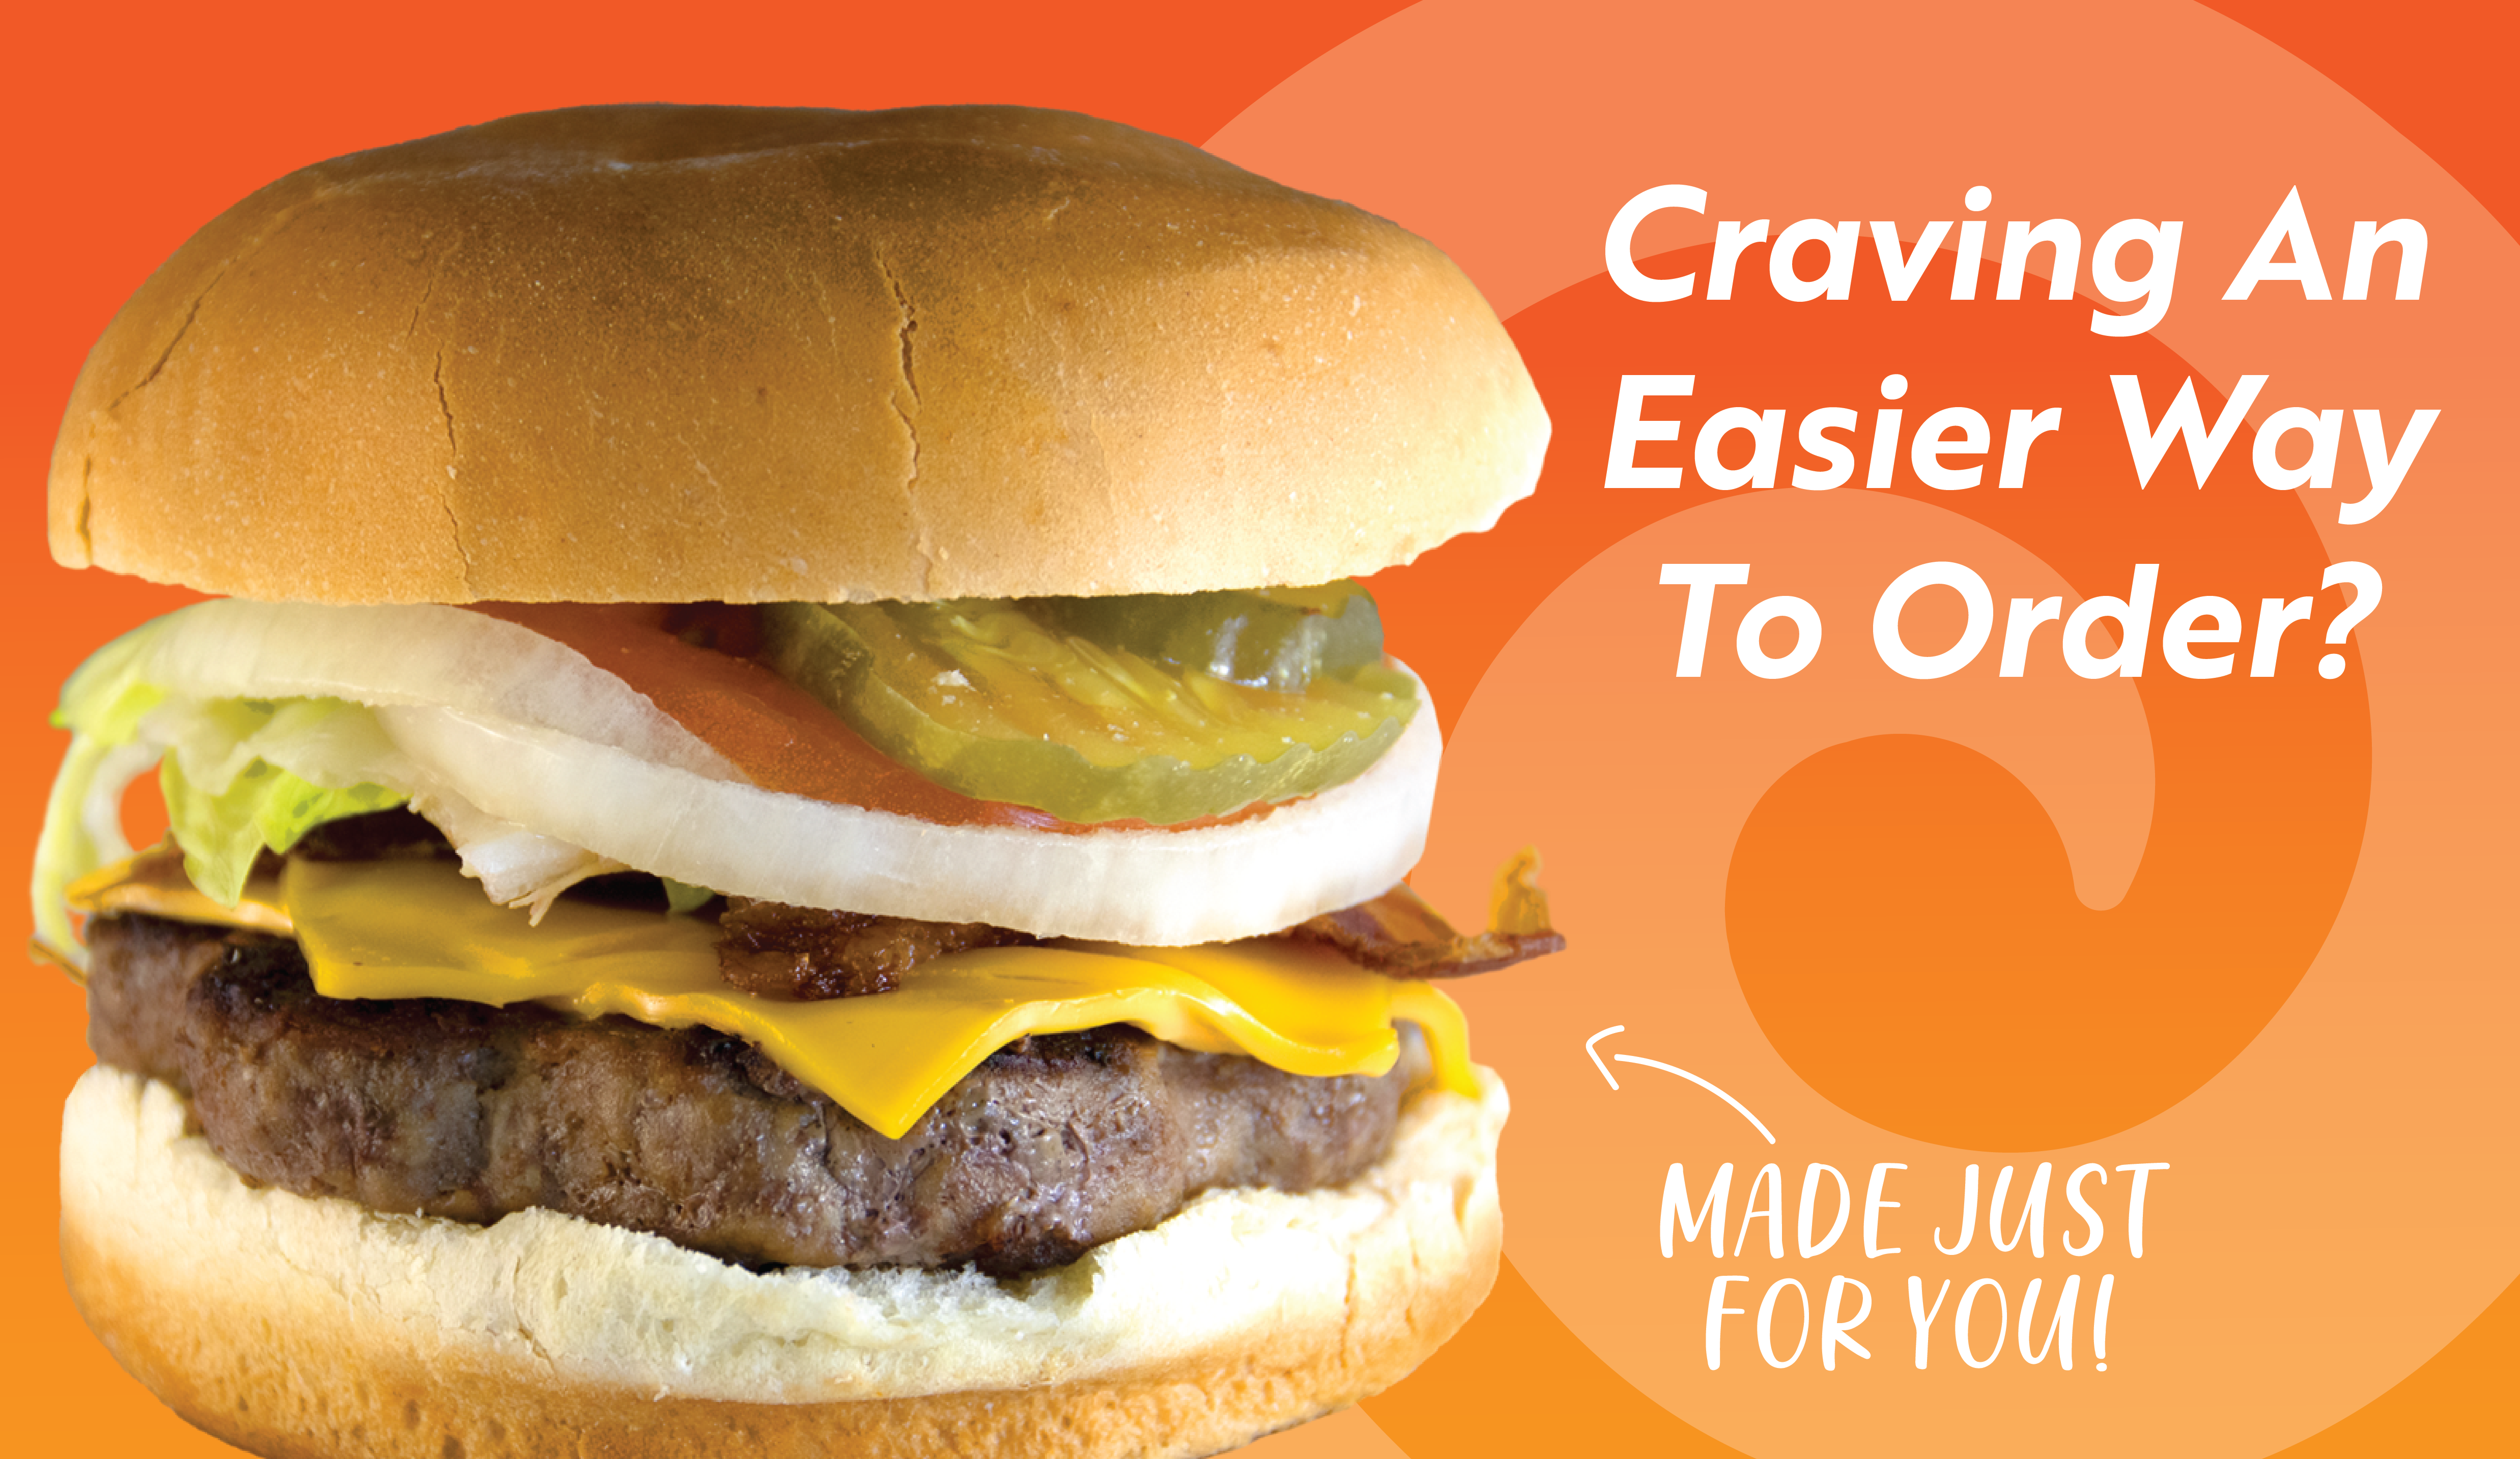 Order online link with a Loaded Cheese Burger